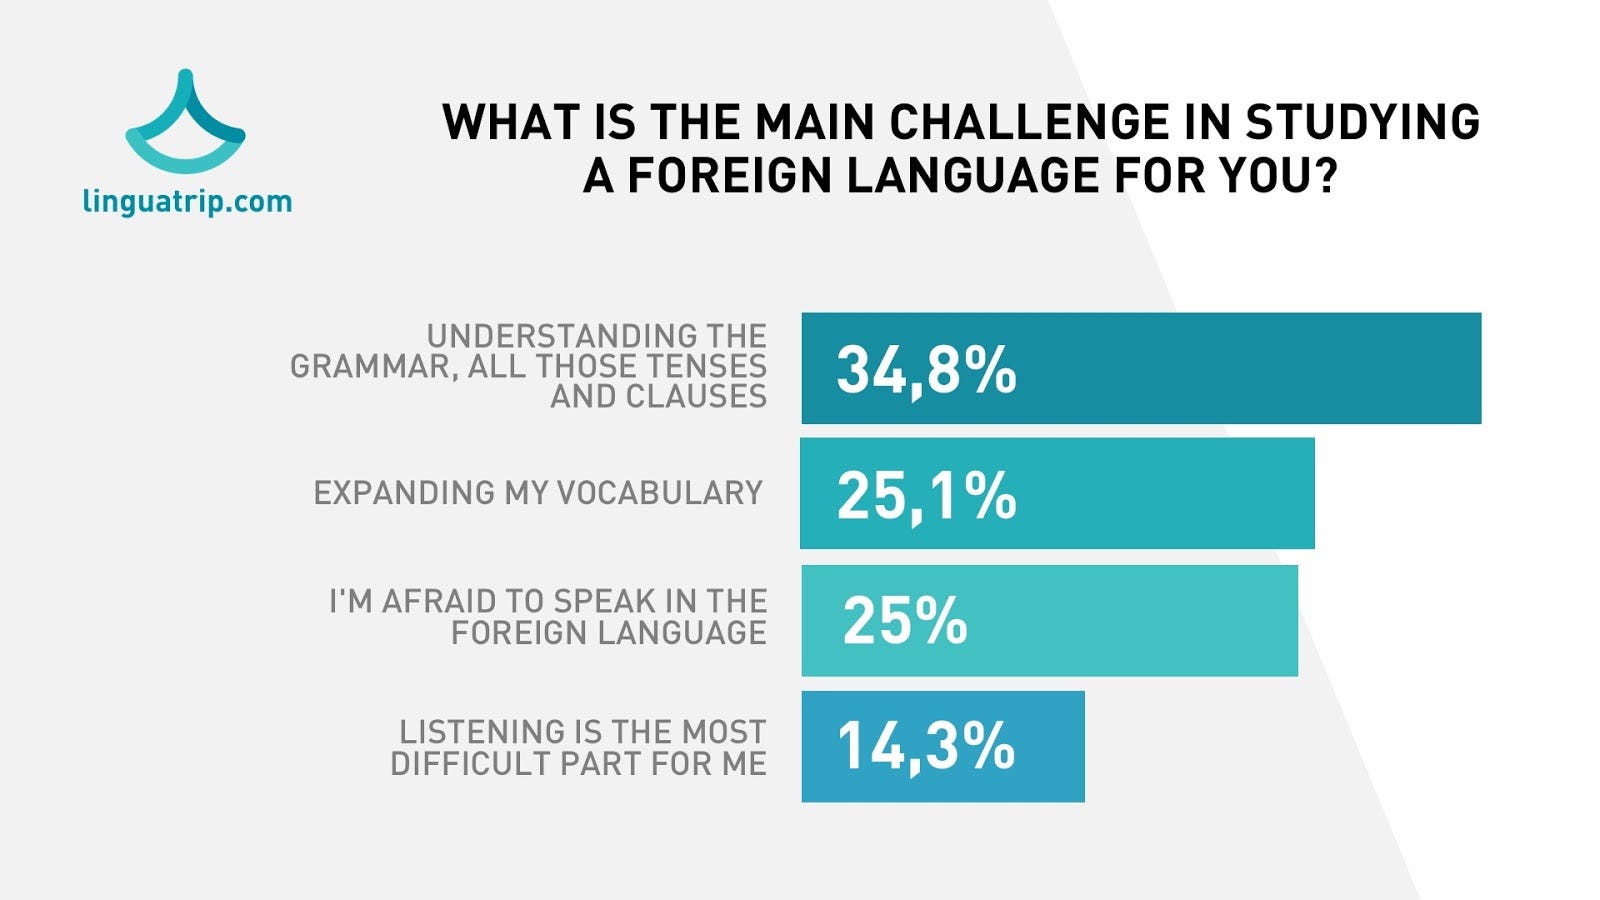 How Youtube Netflix And Video Are Becoming Major Sources For - problems with listening and understanding the speech of natives 14 5 it s the least challenging aspect of language studies according to th!   e survey